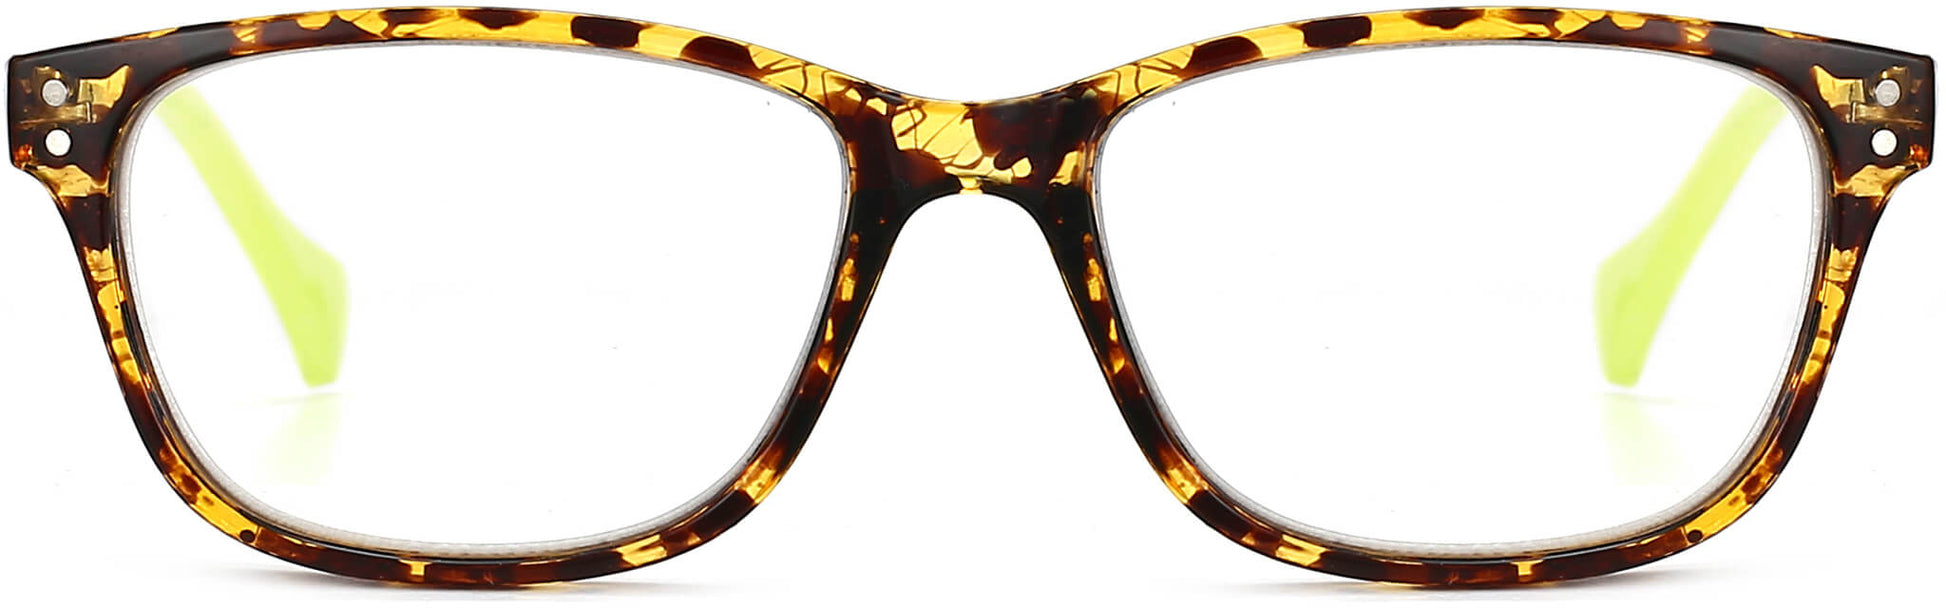 Darby square tortoise Eyeglasses from ANRRI, front view